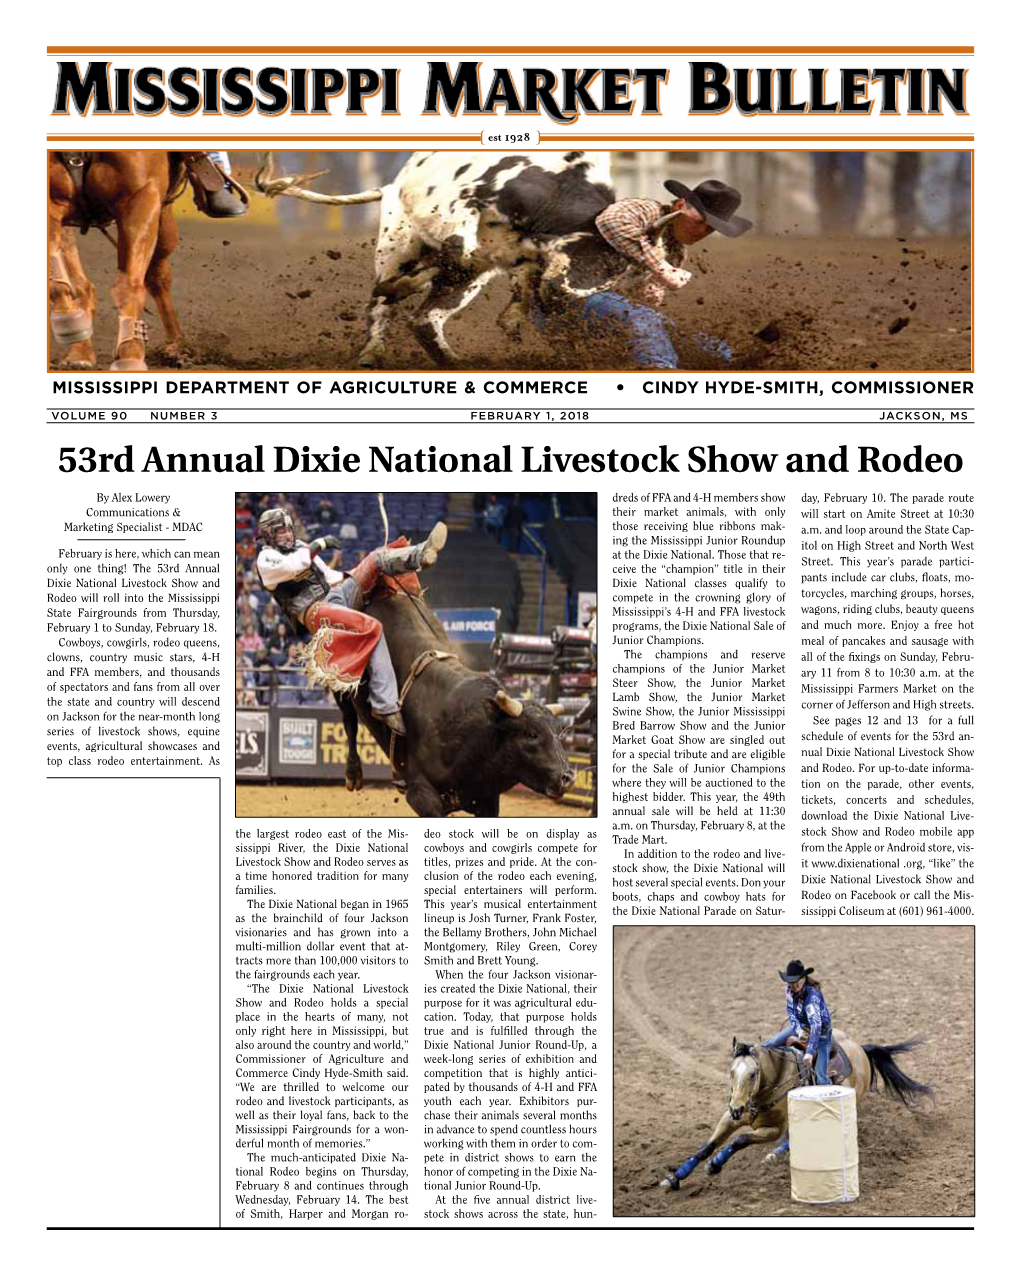 53Rd Annual Dixie National Livestock Show and Rodeo